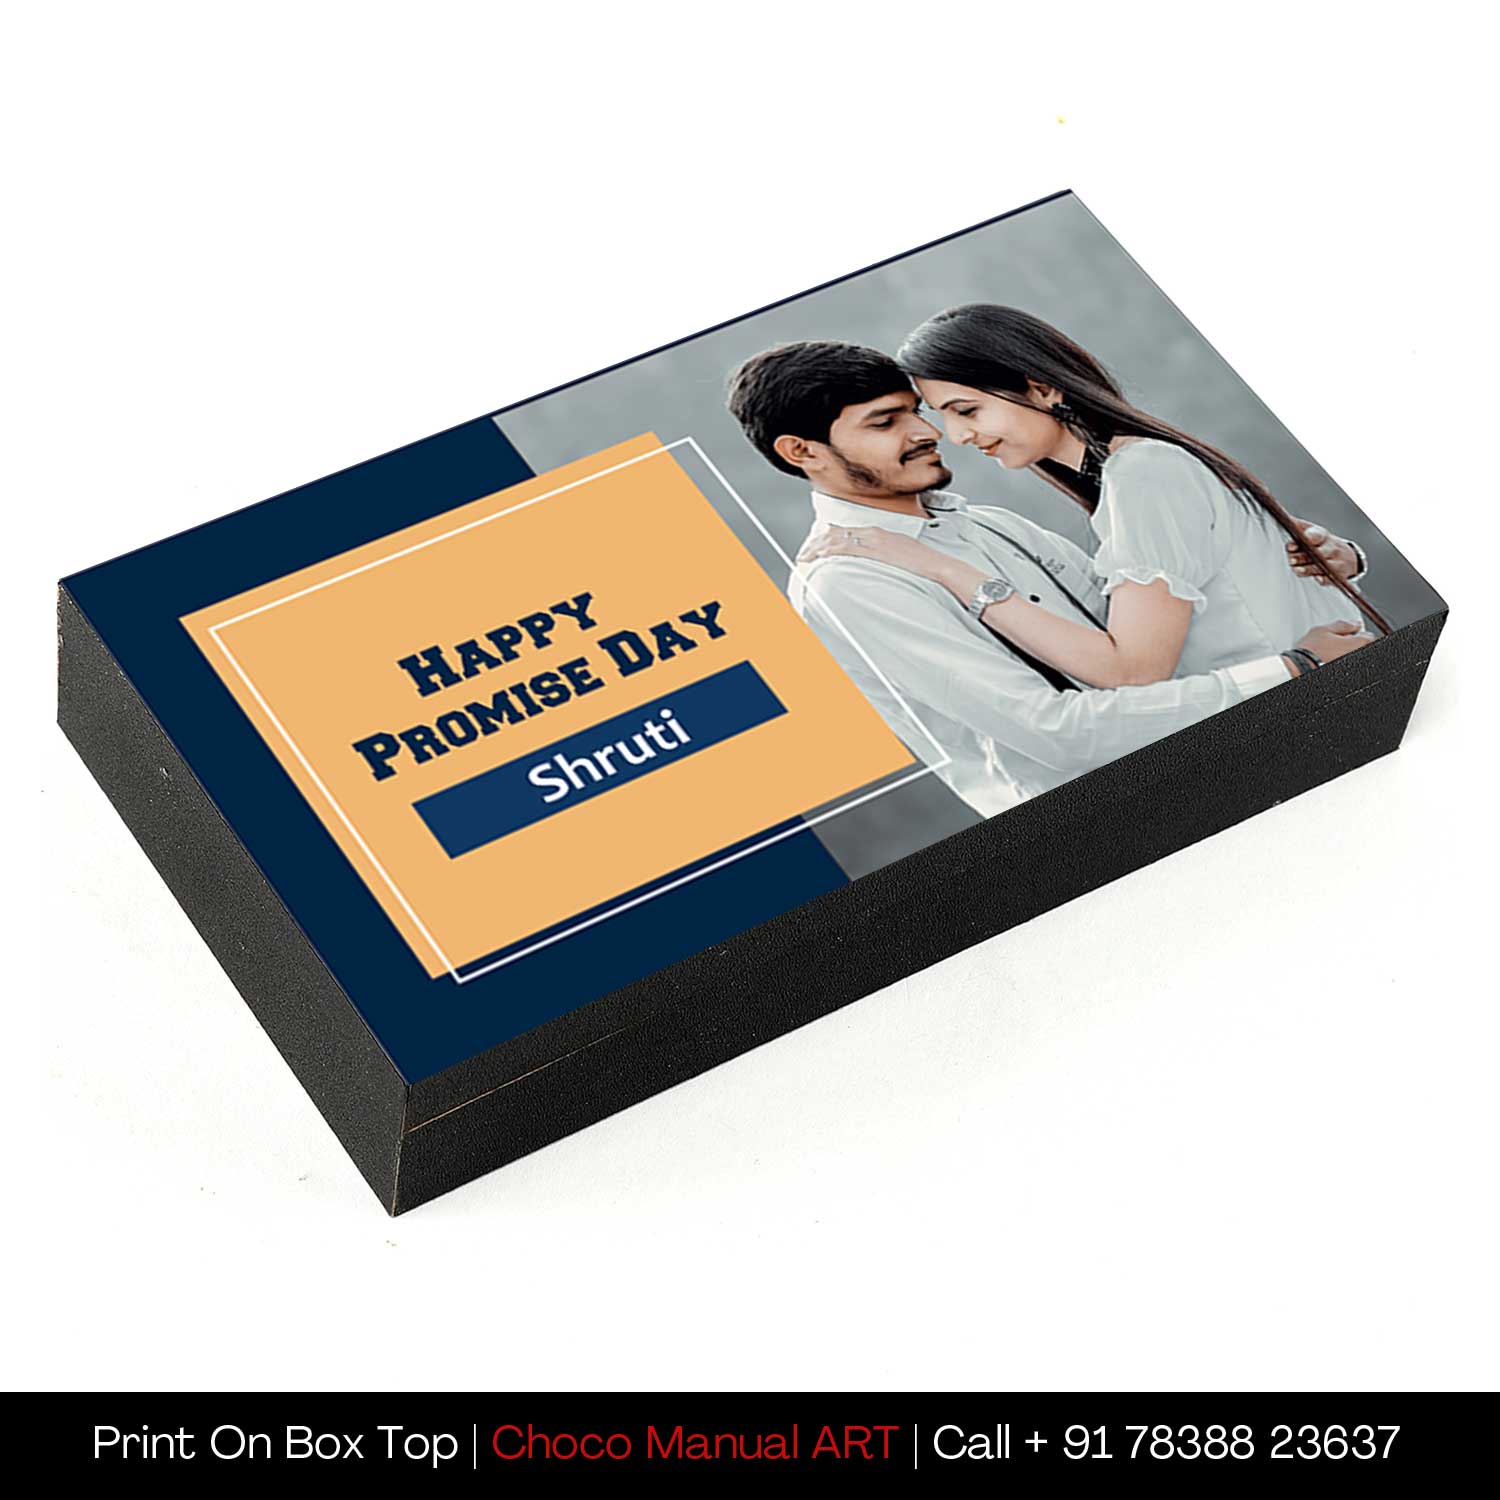 Buy online @399 Promise Day Printed Chocolate with photo/name